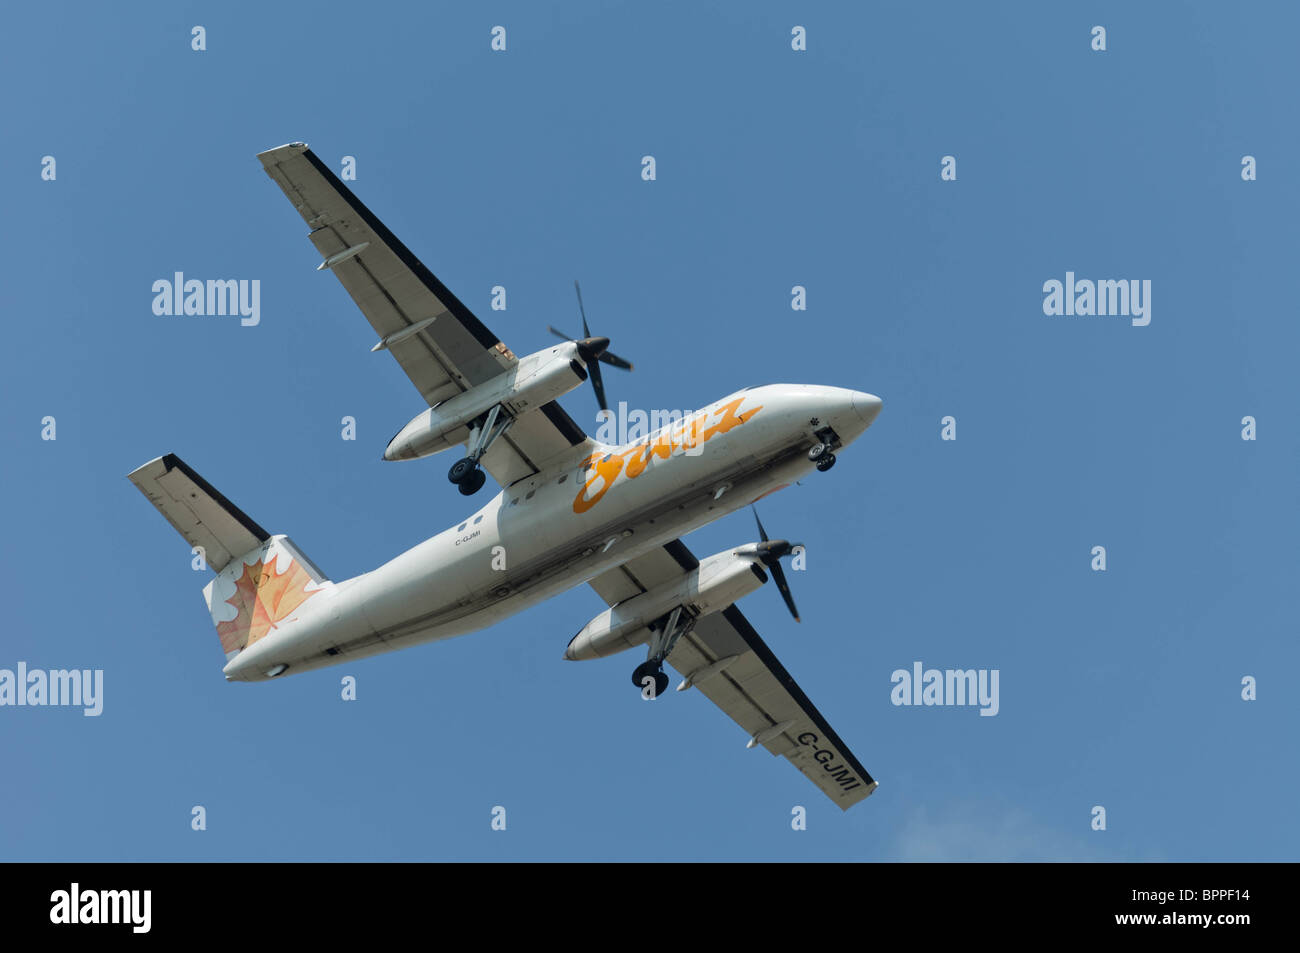 Air Canada Jazz C-GJMI, a DHC-8-102 Dash 8 aircraft on final approach for landing and passenger disembarkment. Stock Photo